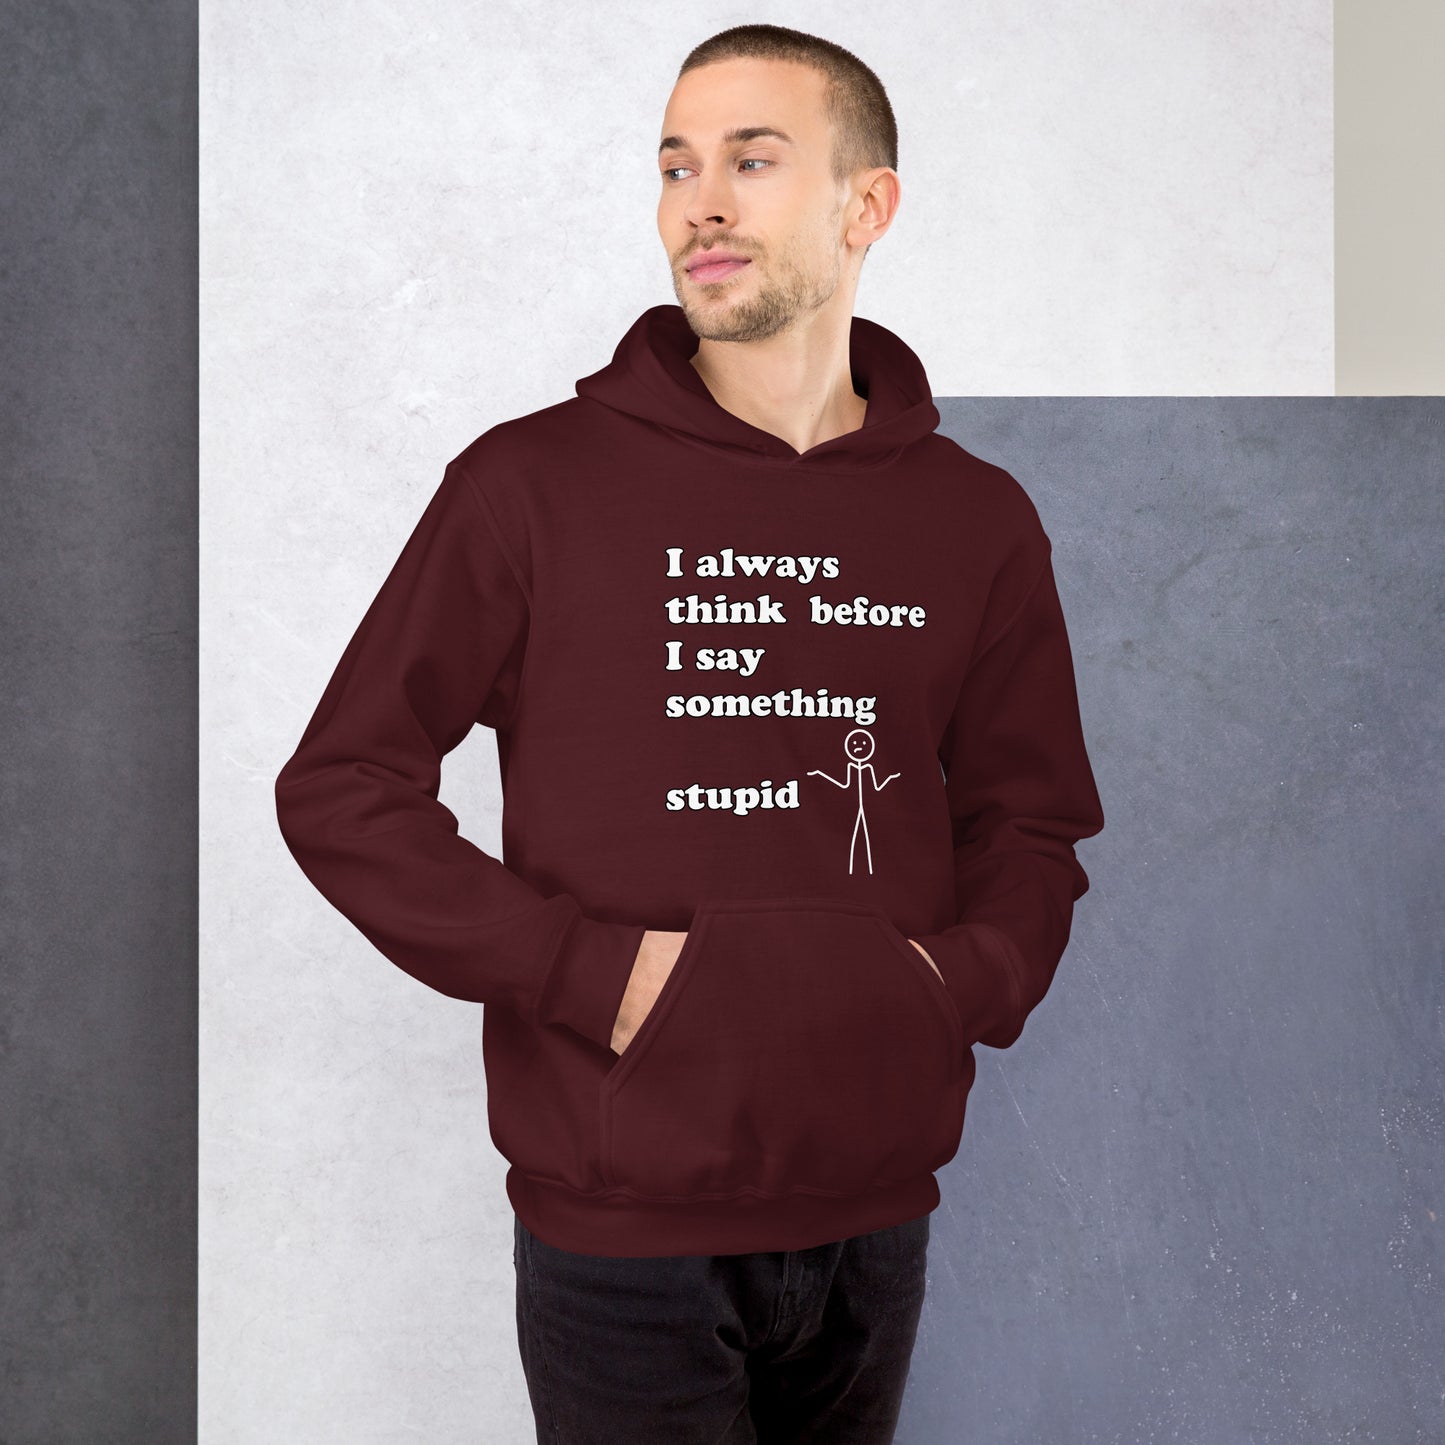 Man with maroon hoodie with text "I always think before I say something stupid"